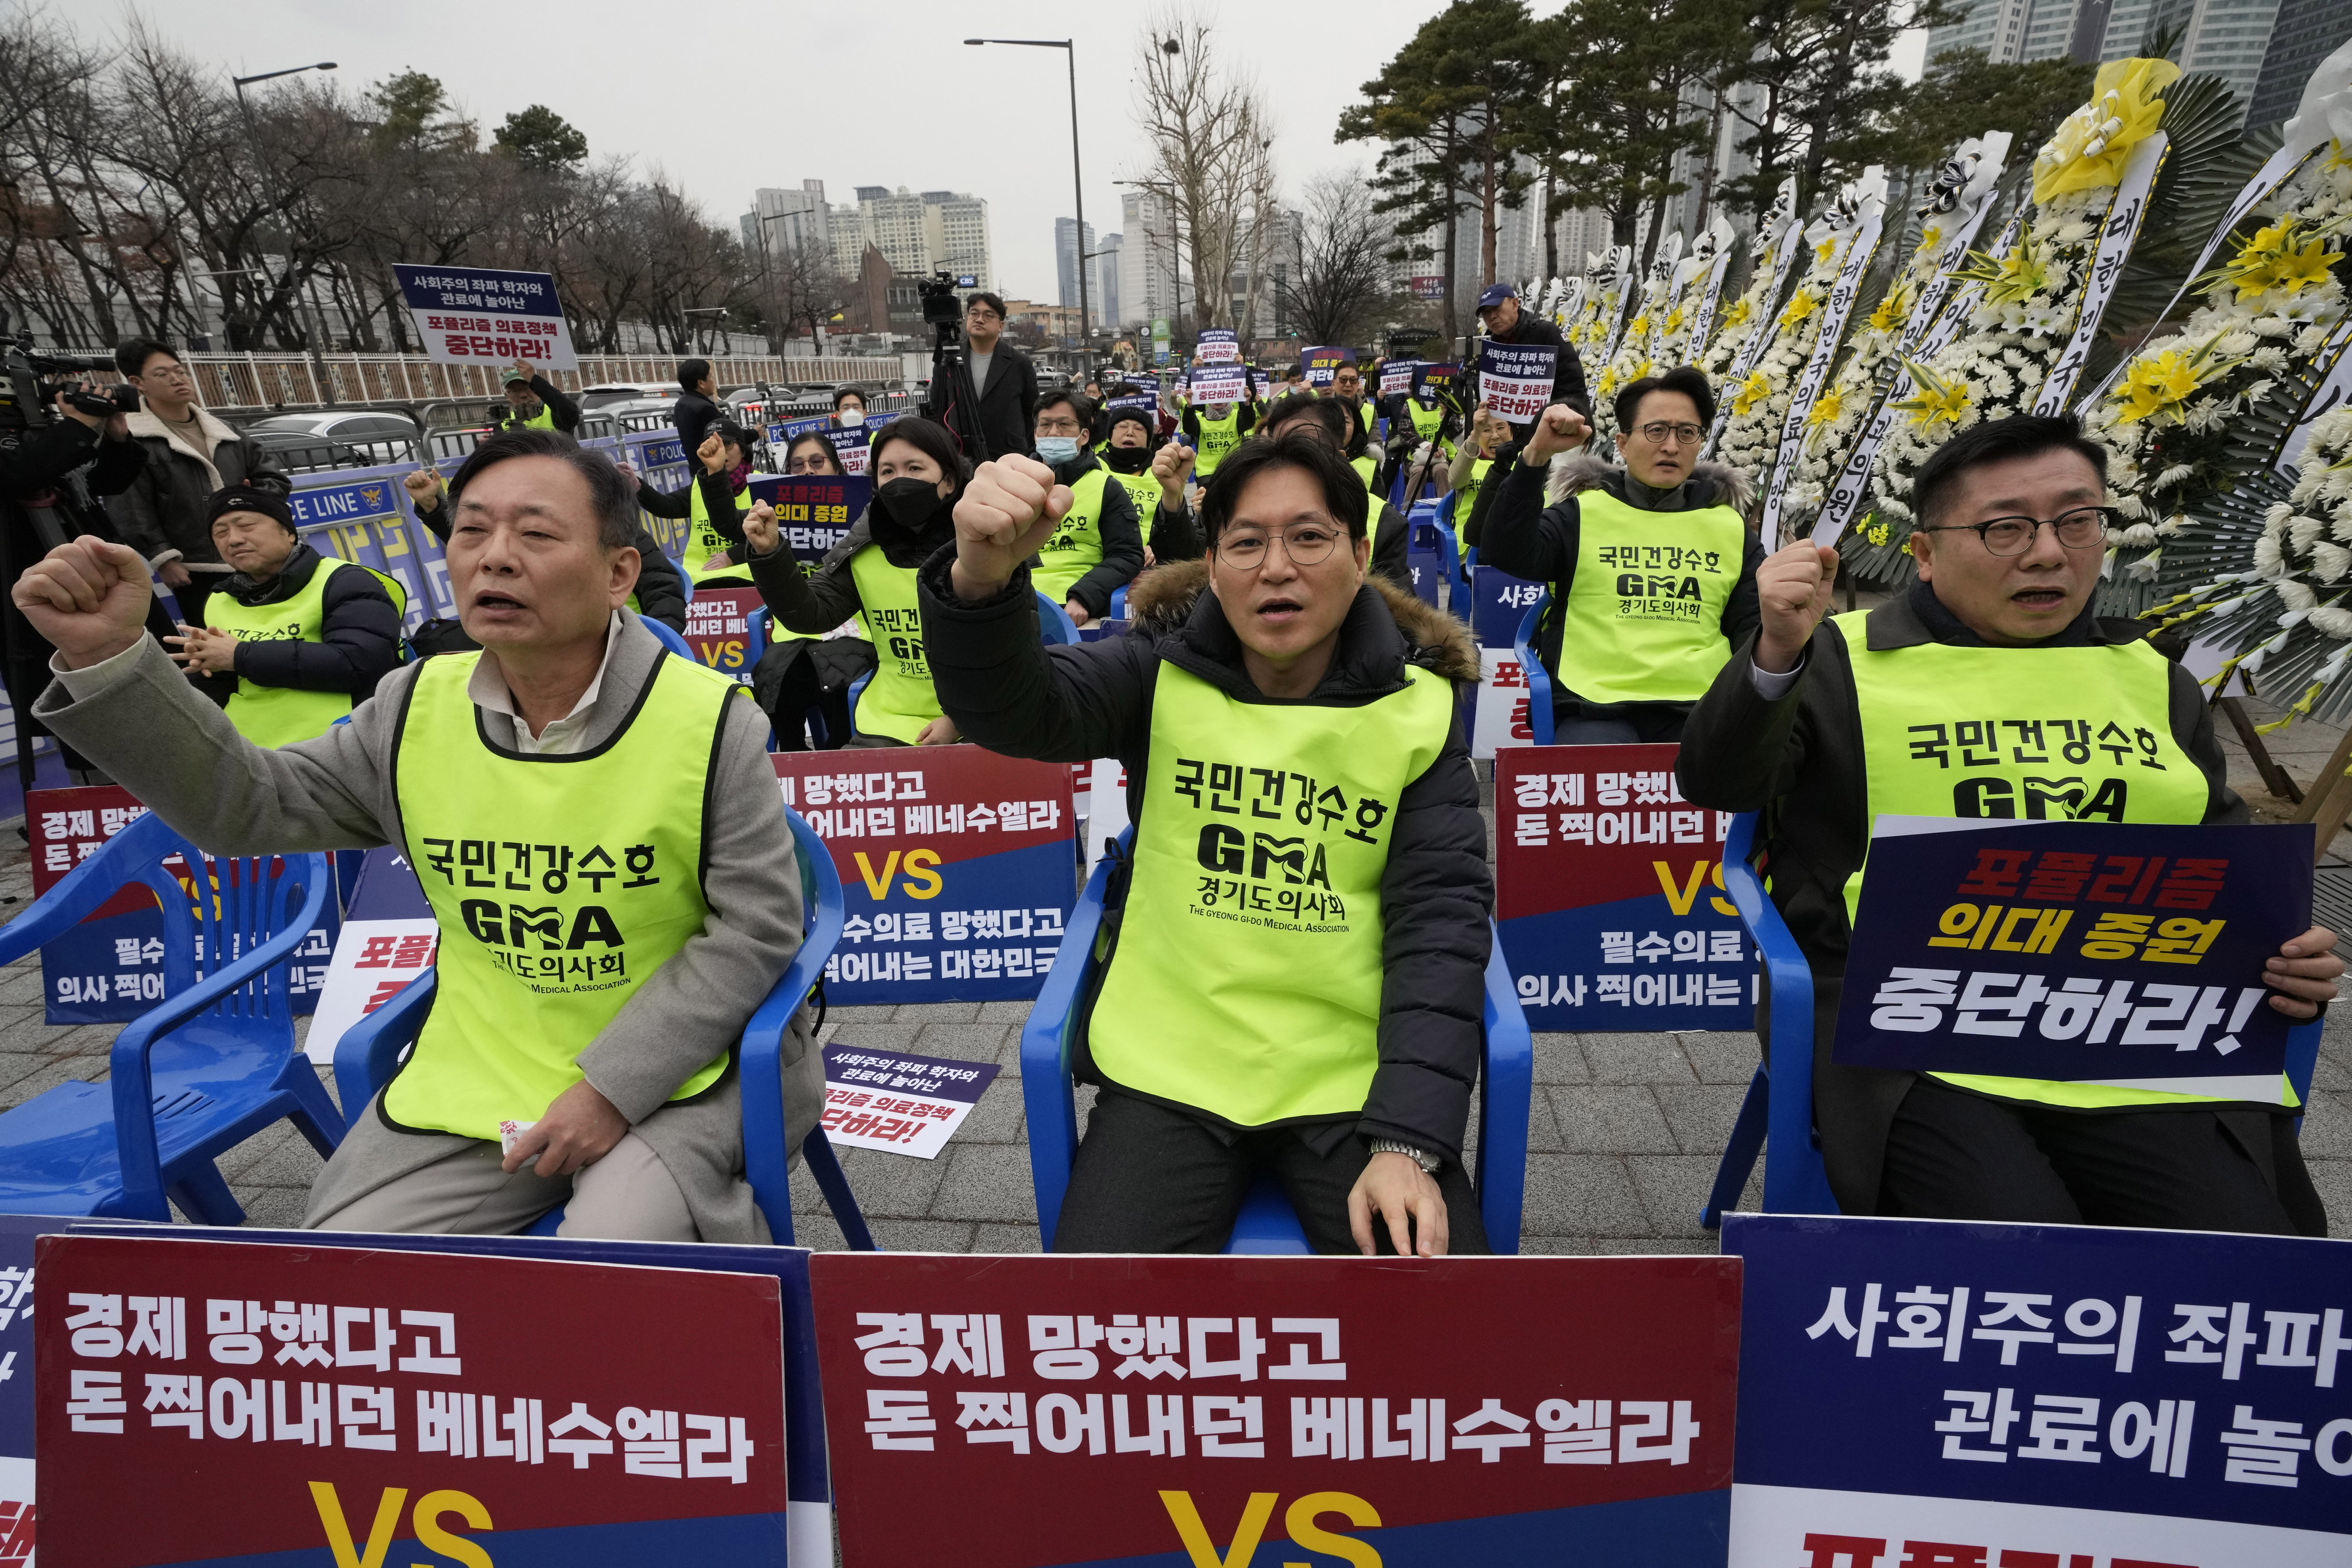 Members of the Korea Medical Association stage a rally against the government’s medical policy near the presidential office in Seoul, South Korea on Wednesday. Photo: AP